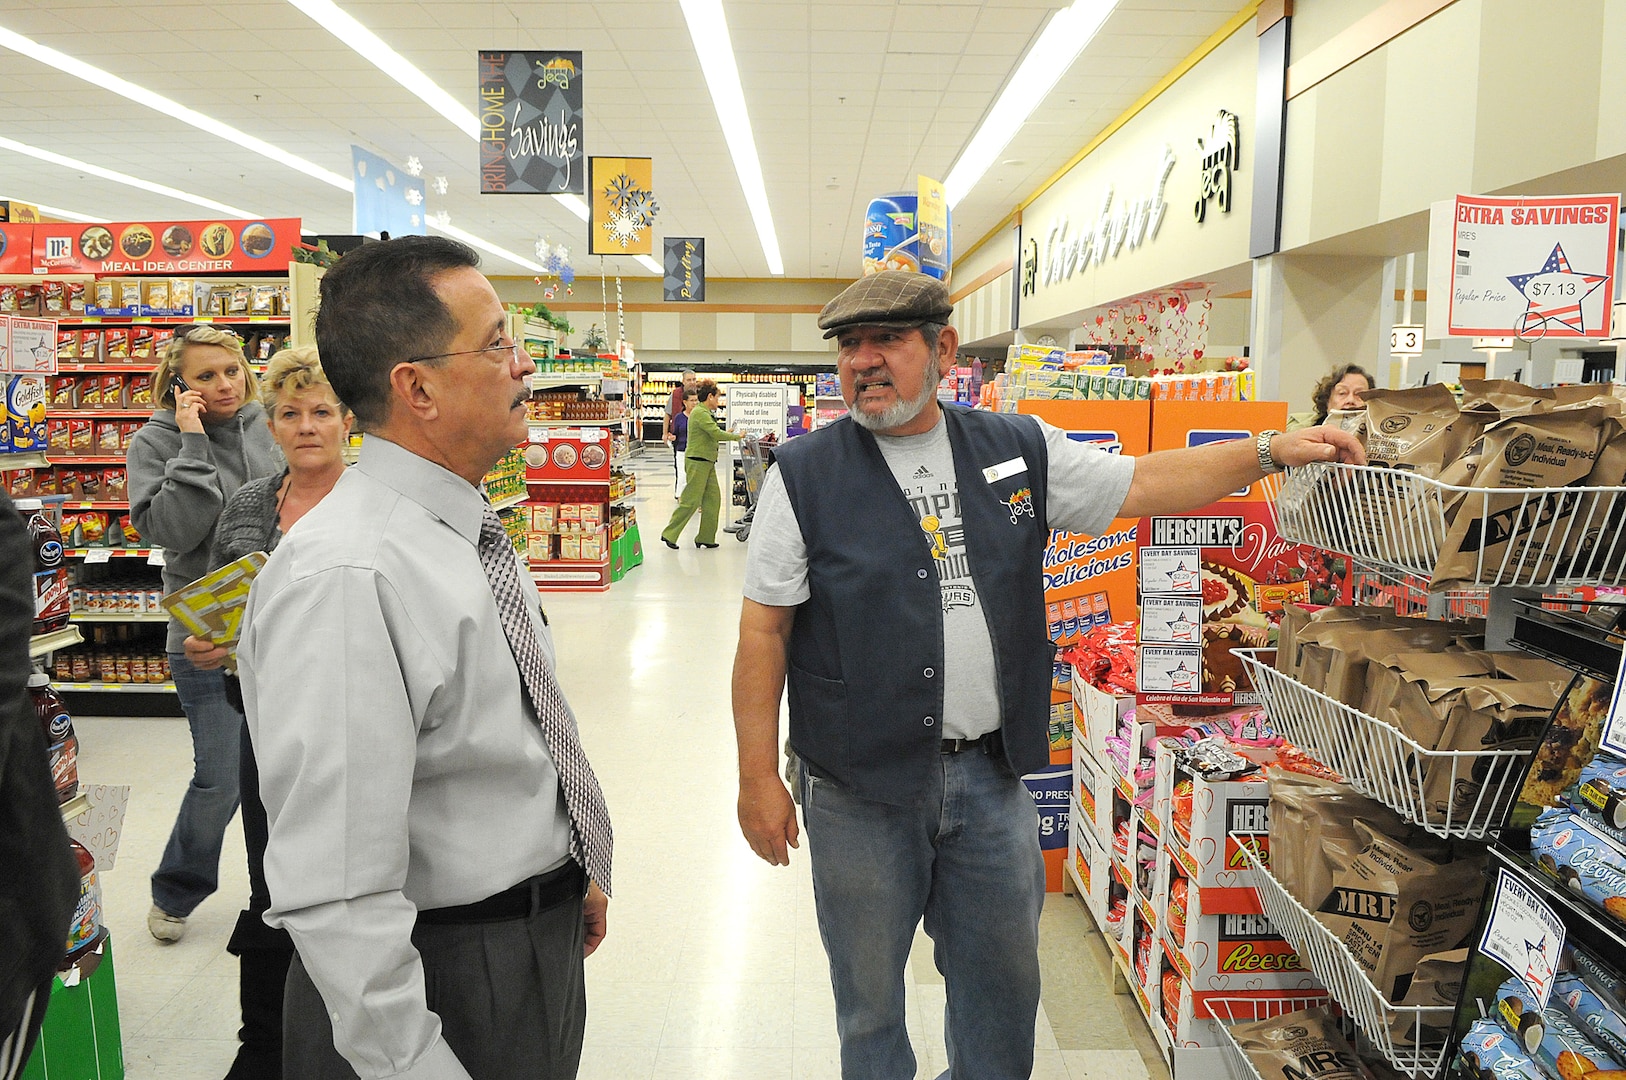 New commissary manager Juan Rodriguez, left, talks with associate Manuel Sanchez a he stocks the shelves at the commissary Jan. 21 at Randolph Air Force Base, Texas. (U.S. Air Force photo/David Terry)